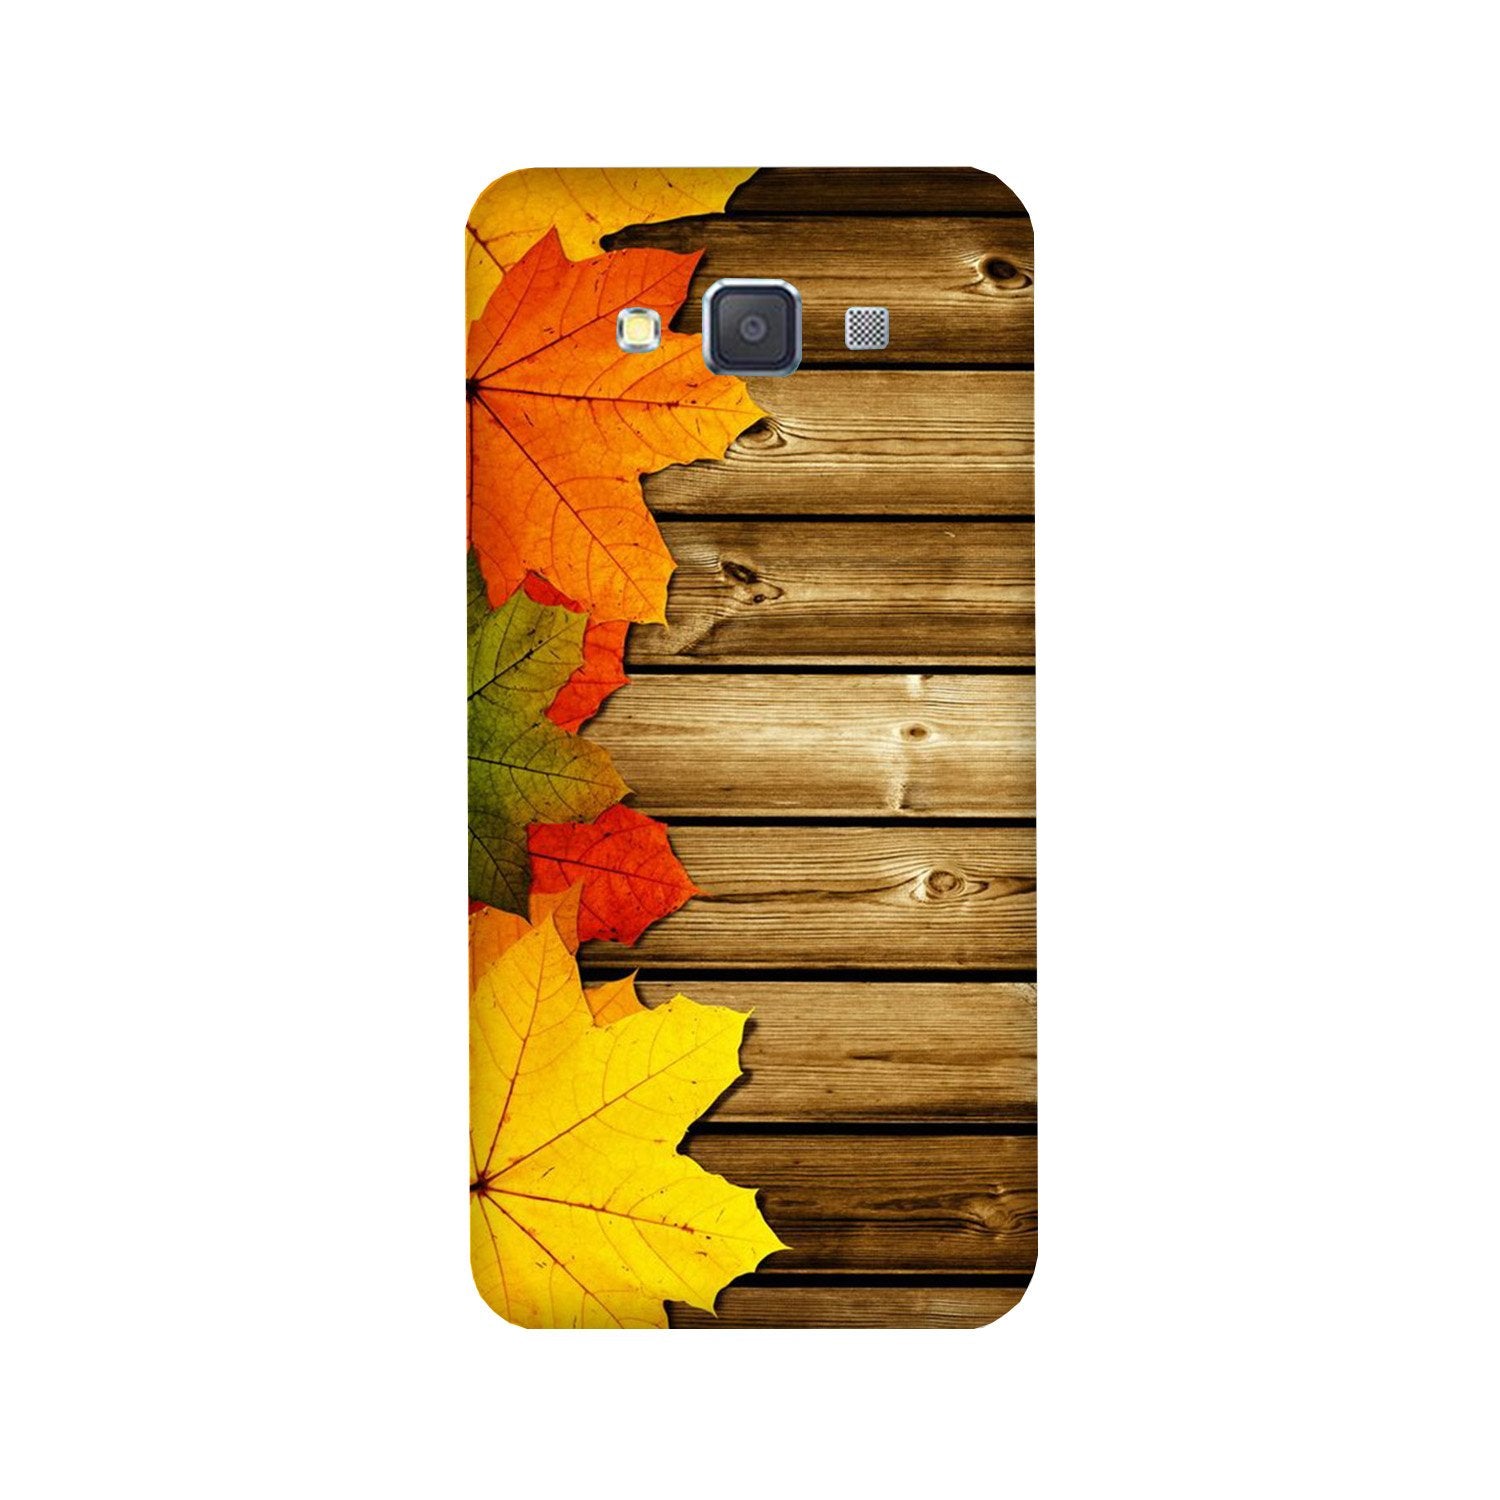 Wooden look3 Case for Galaxy J7 (2016)